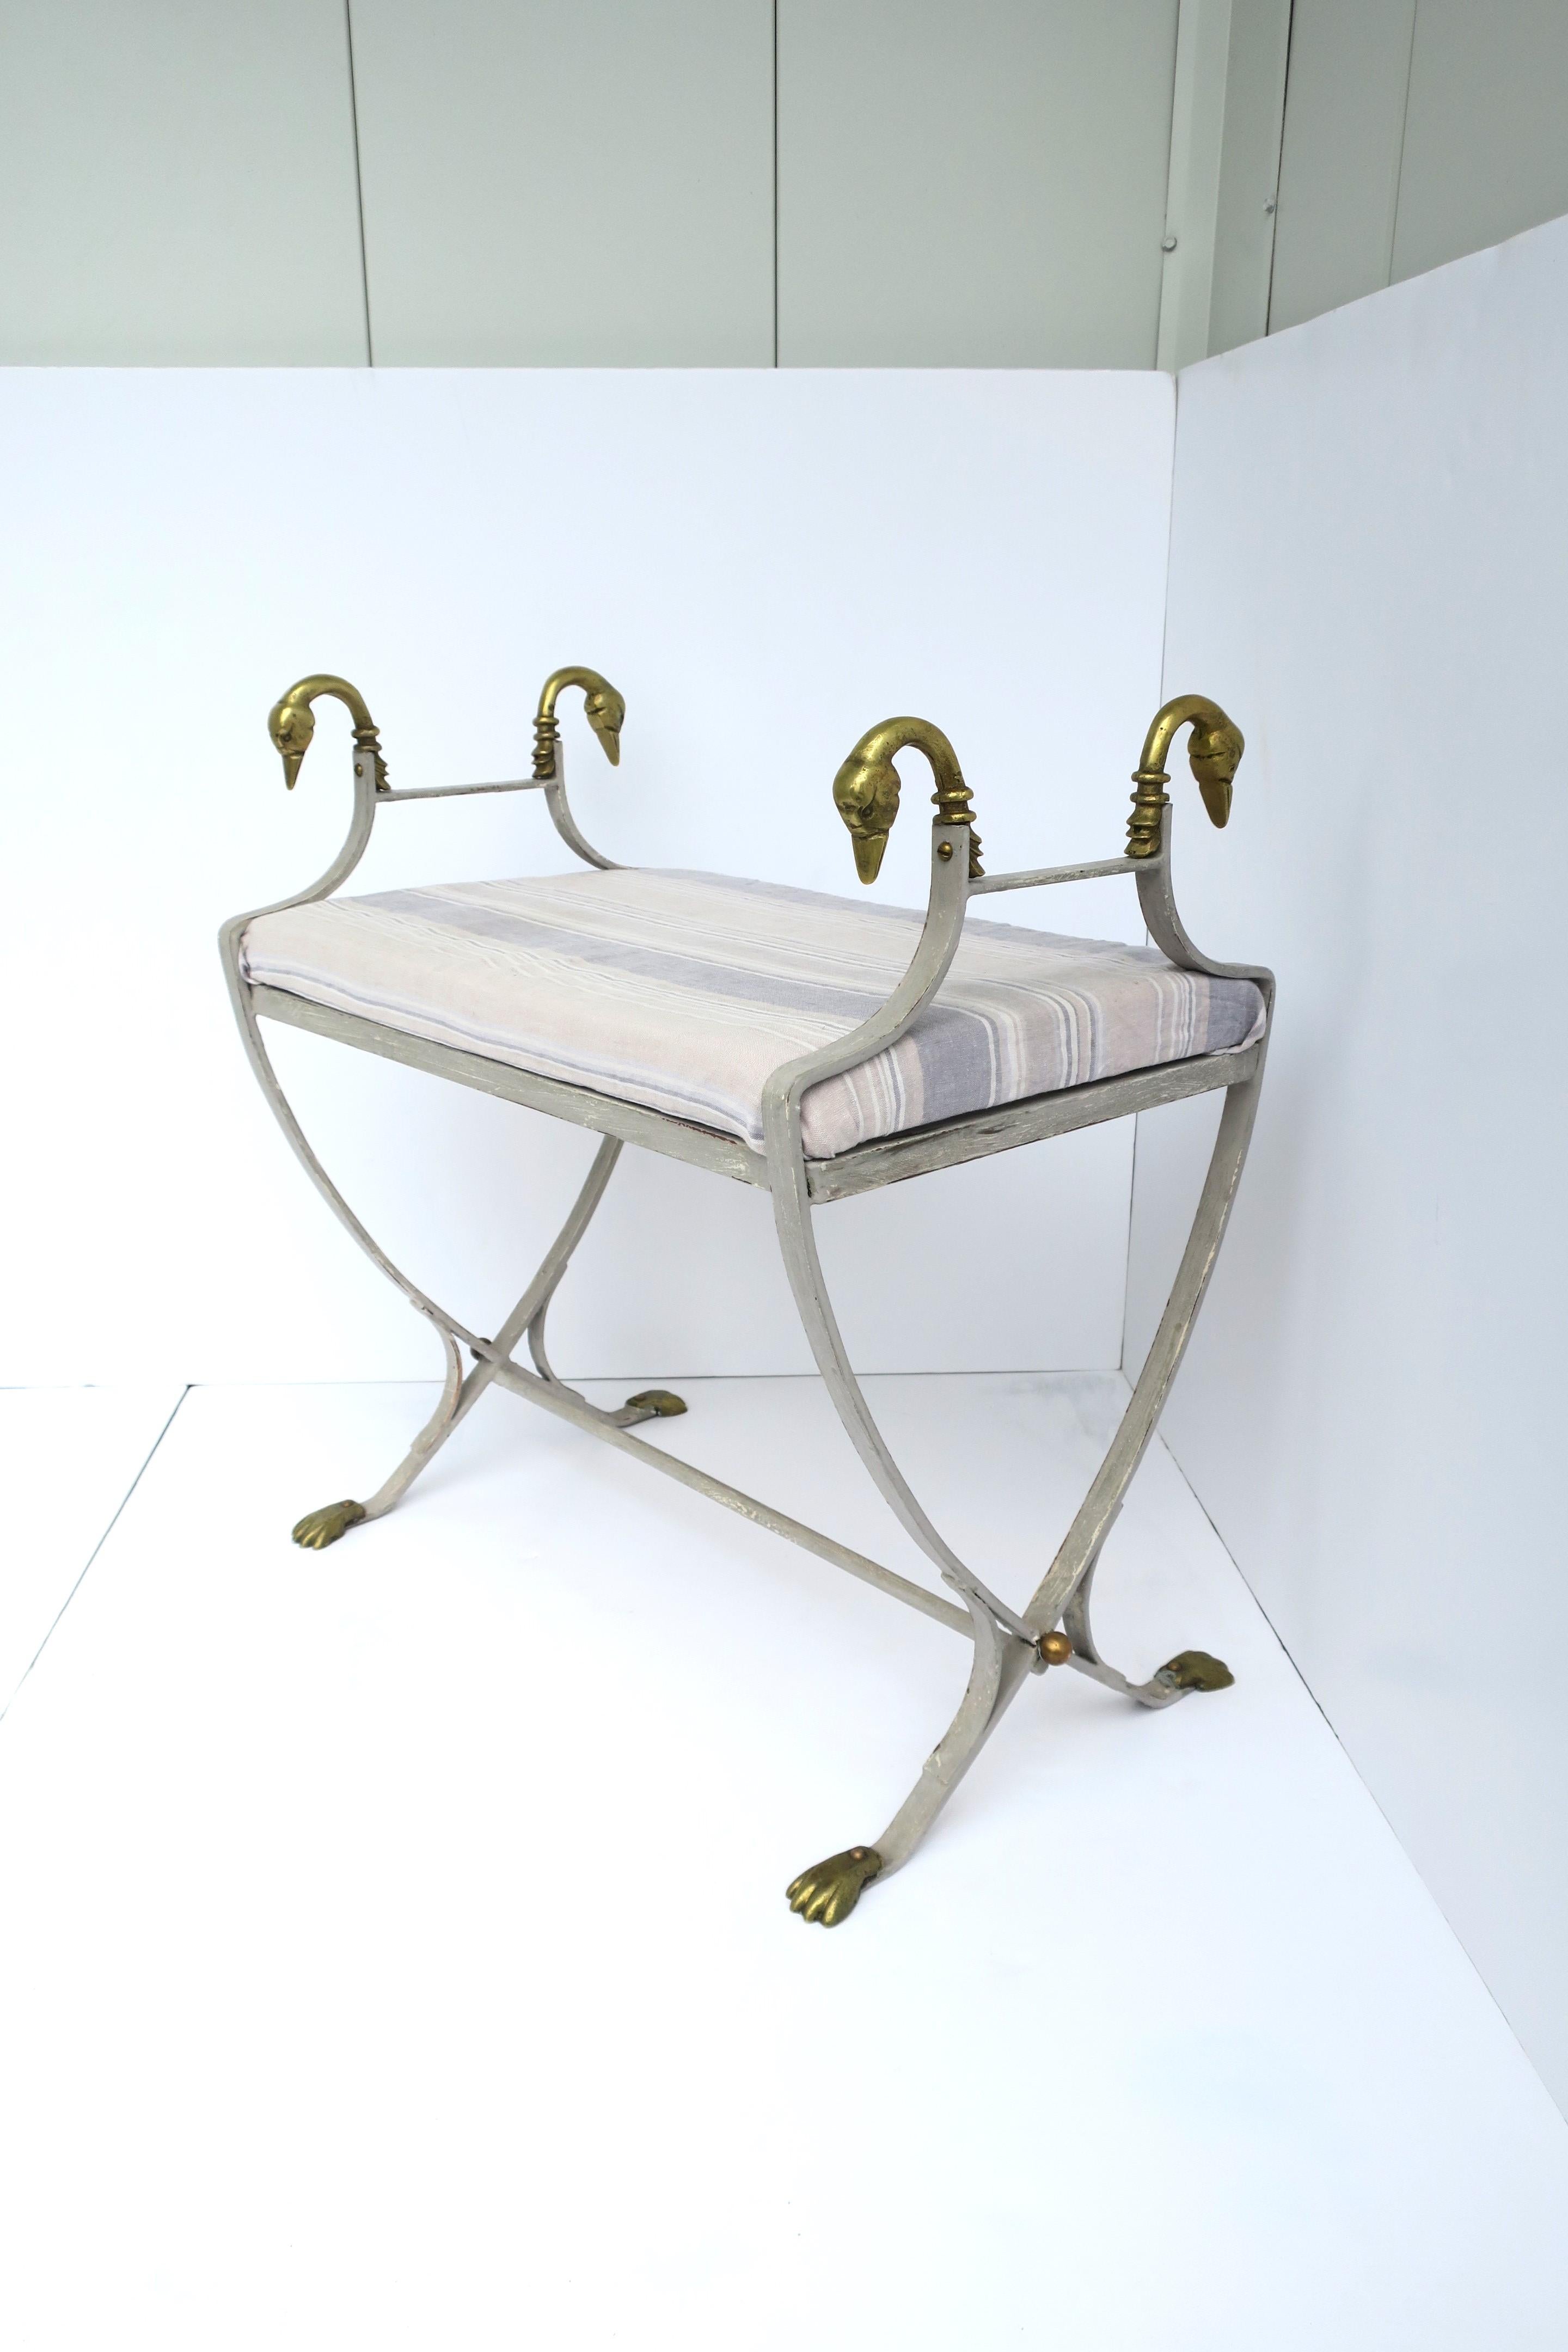 A beautiful grey metal framed and brass swan bird head bench in the Regency style, circa mid-20th century, Europe. Bench's metal frame is a grey-white hue with solid brass swan bird head finials, stretcher base, brass paw feet, finished with copper